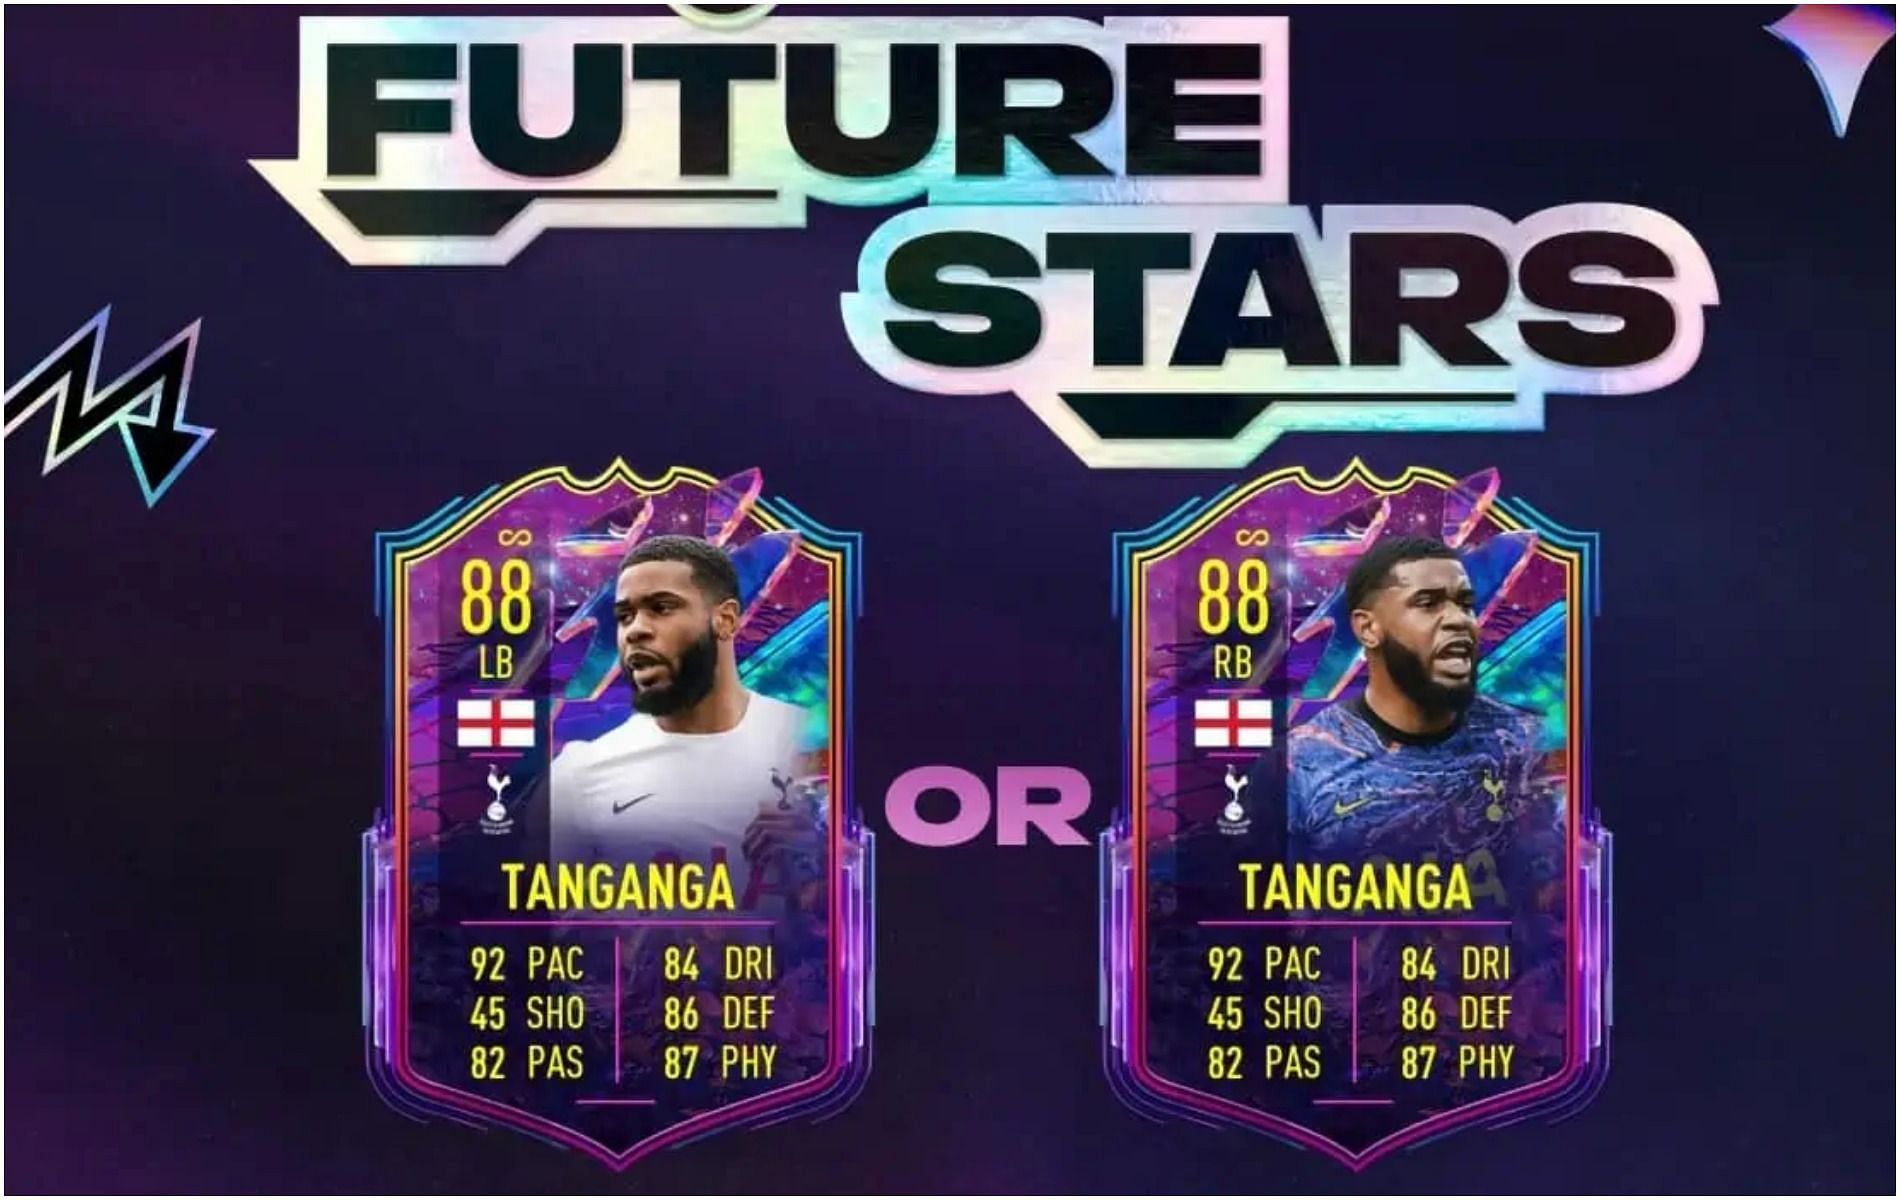 A new player item SBC is now available in FIFA 22 (Image via EA Sports)